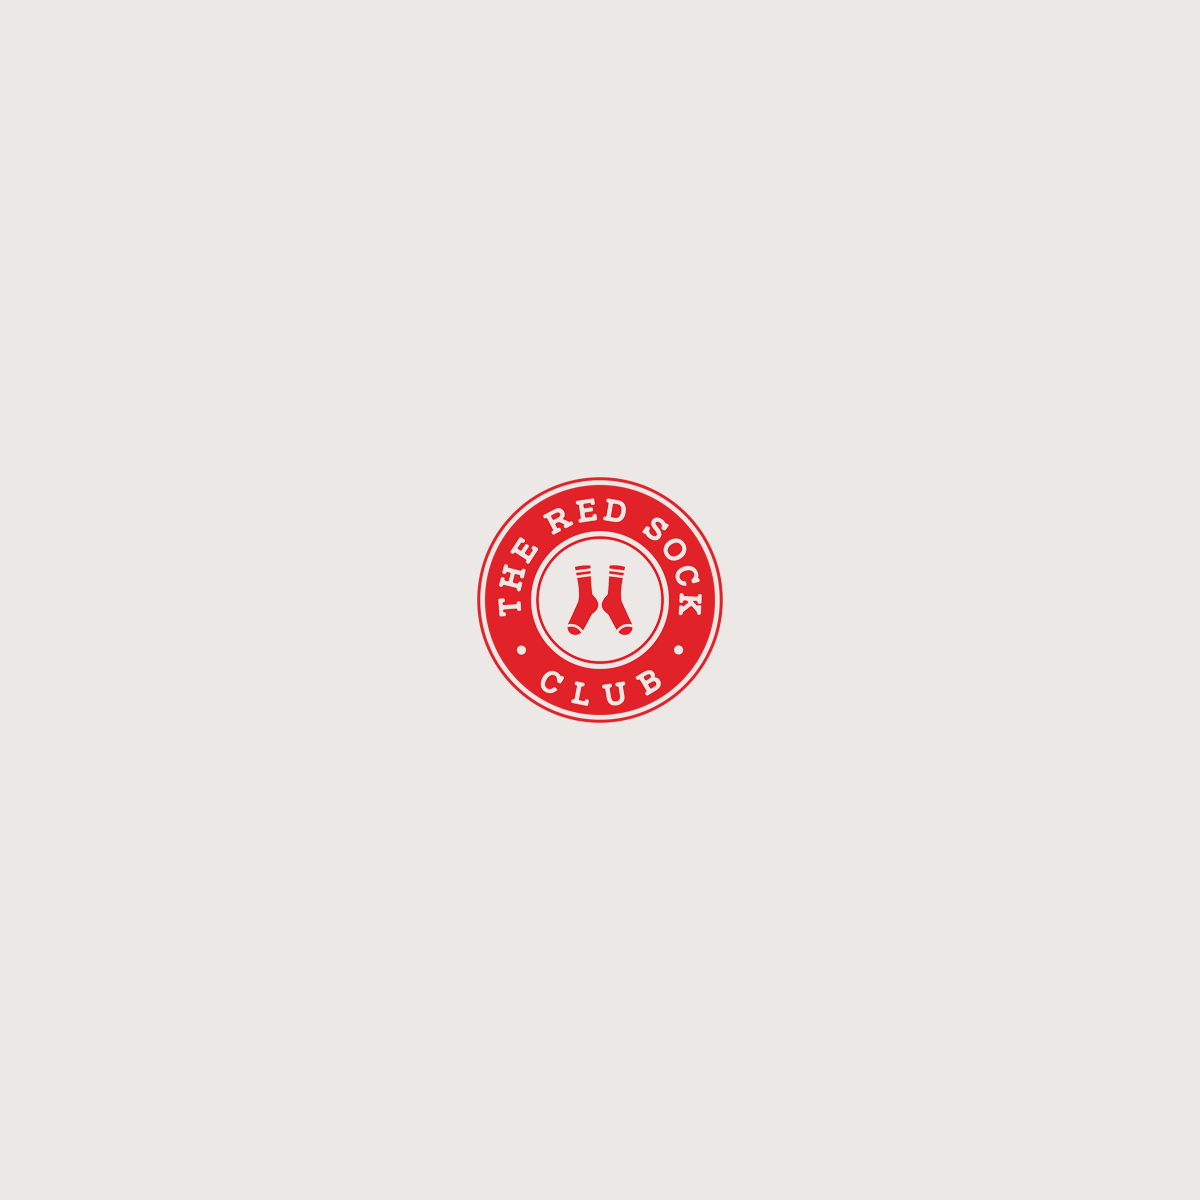 Red Clothing Logo - Bold, Modern, Clothing Logo Design for THE RED SOCK CLUB by F!or